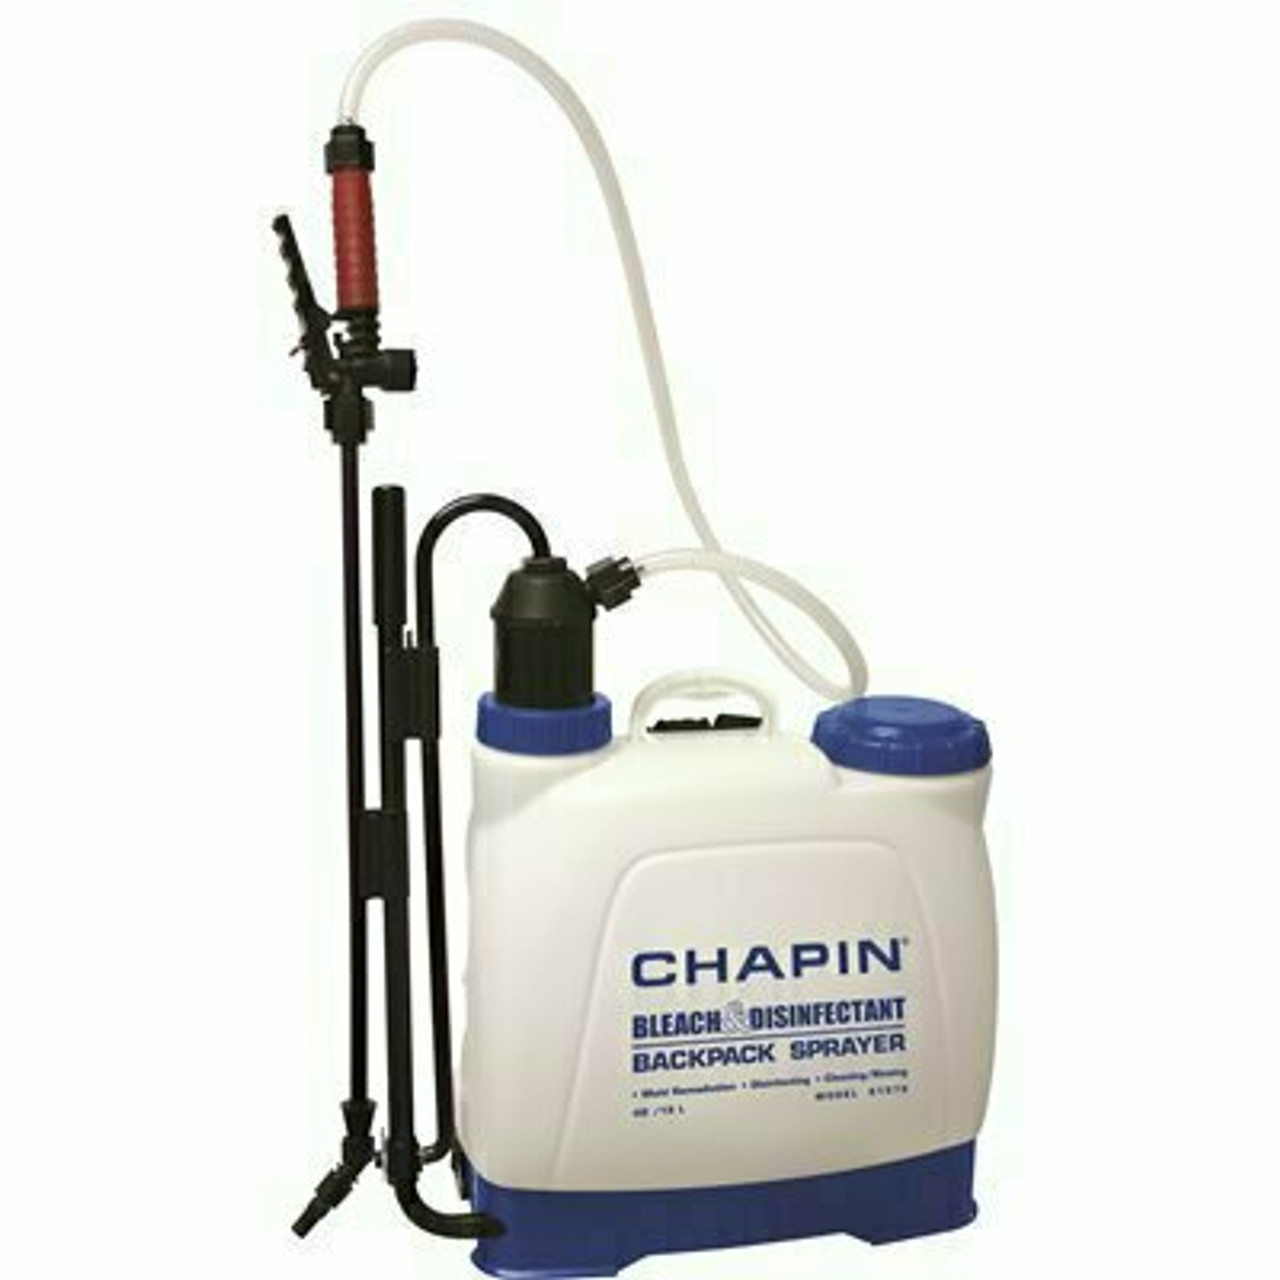 Chapin 4 Gal. Euro-Style Backpack Bleach And Disinfectant Sprayer